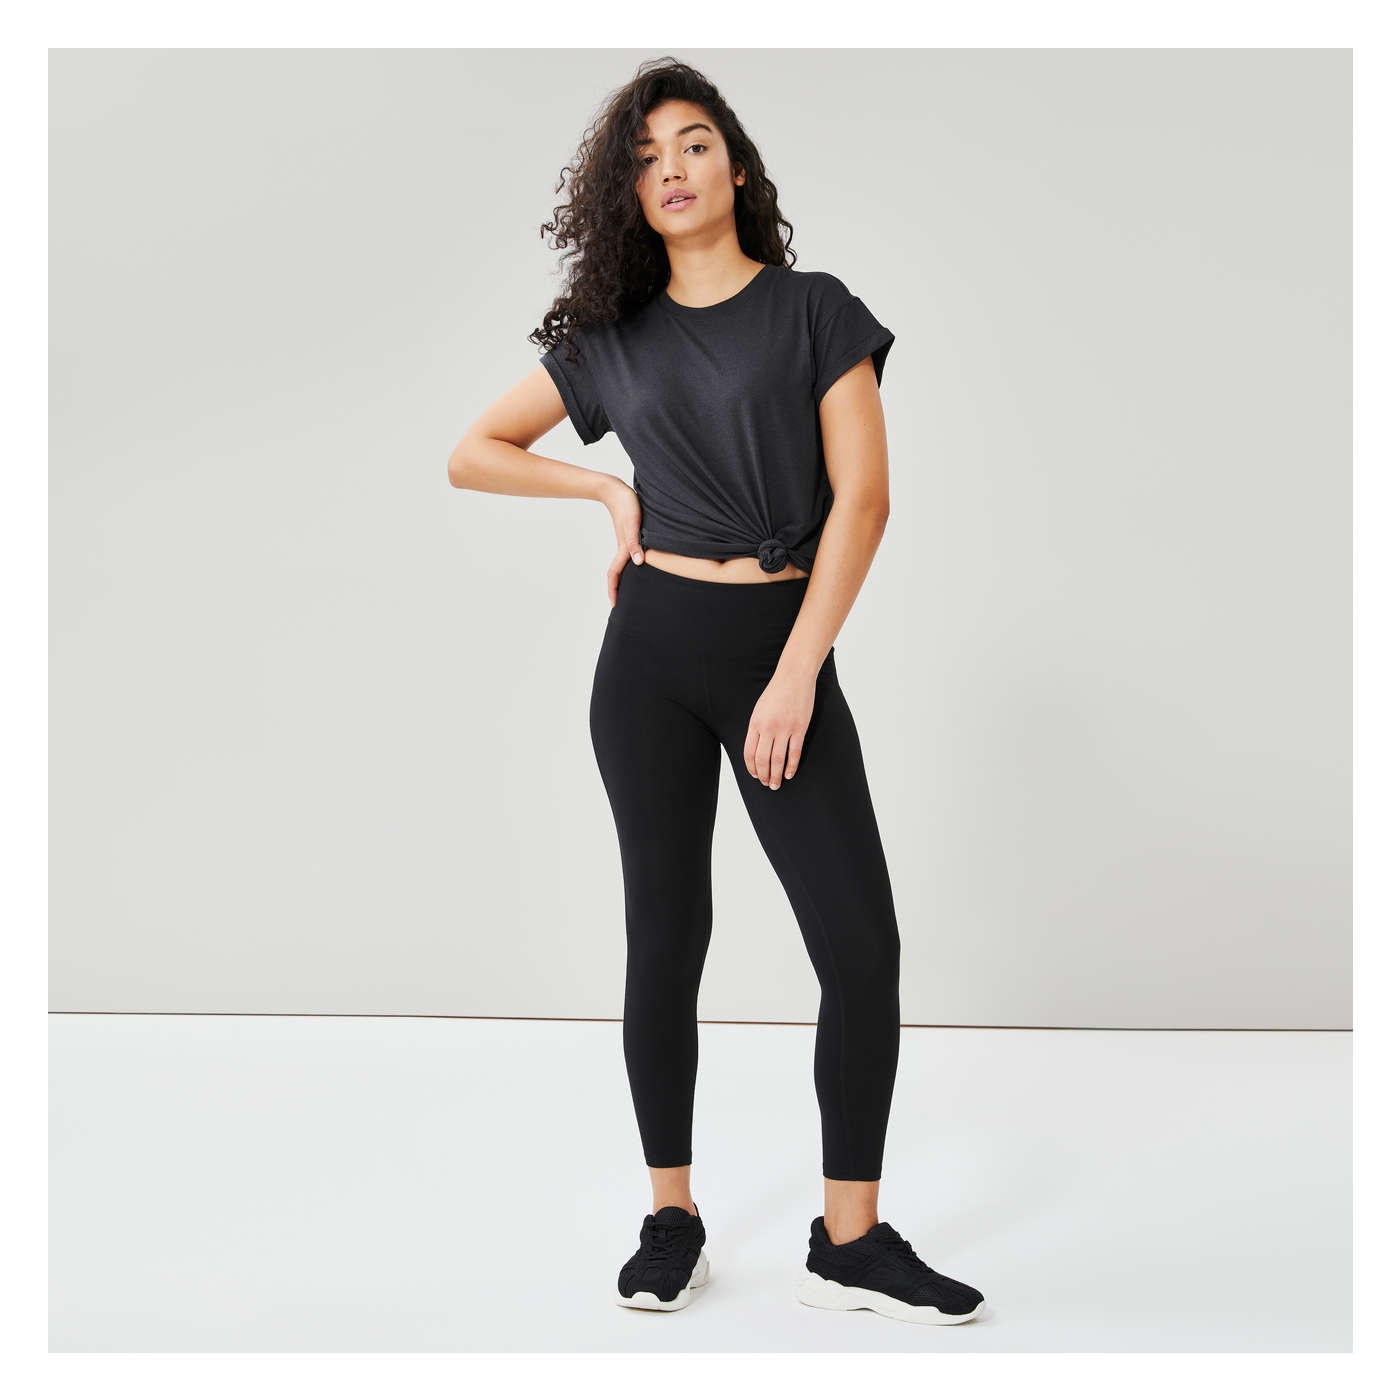 Avia Black Leggings Size XS - $16 (64% Off Retail) - From Amber